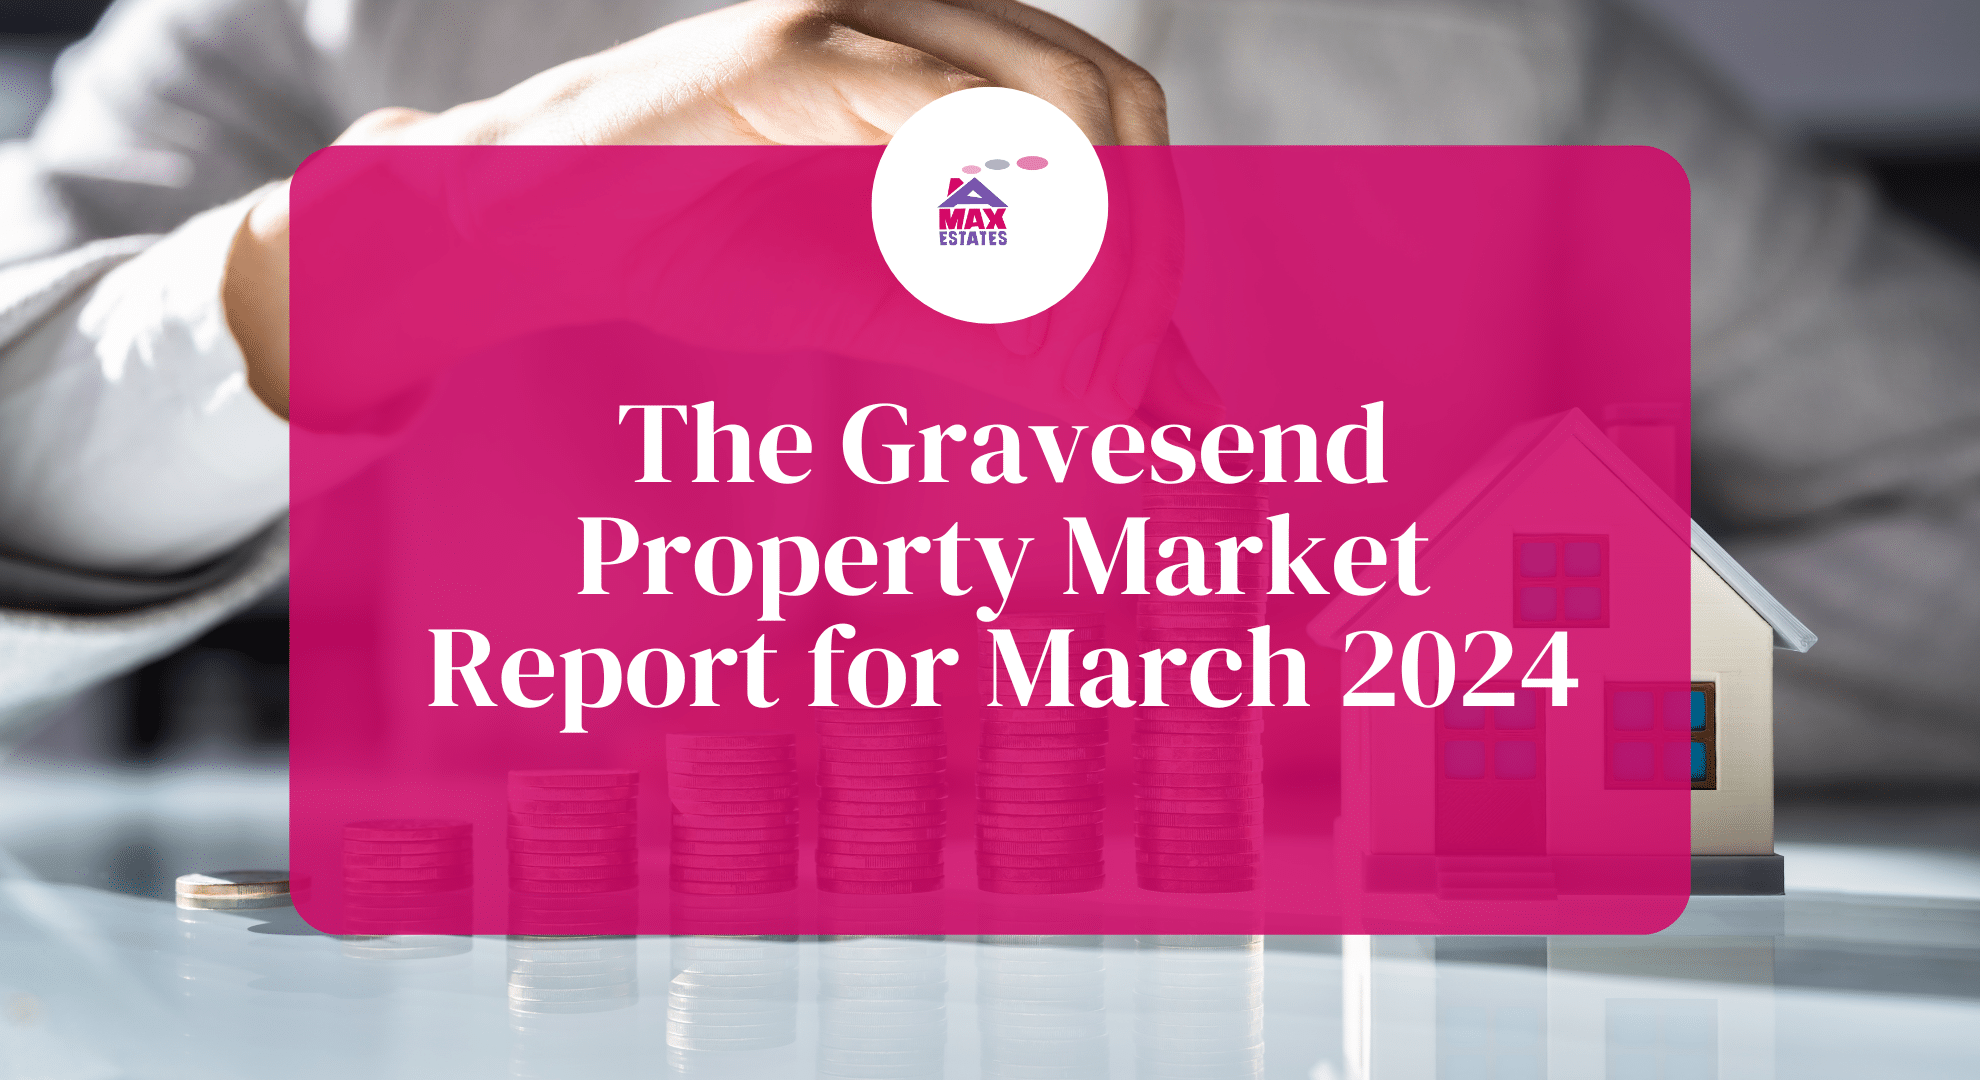 The Gravesend Property Market Report for March 2024